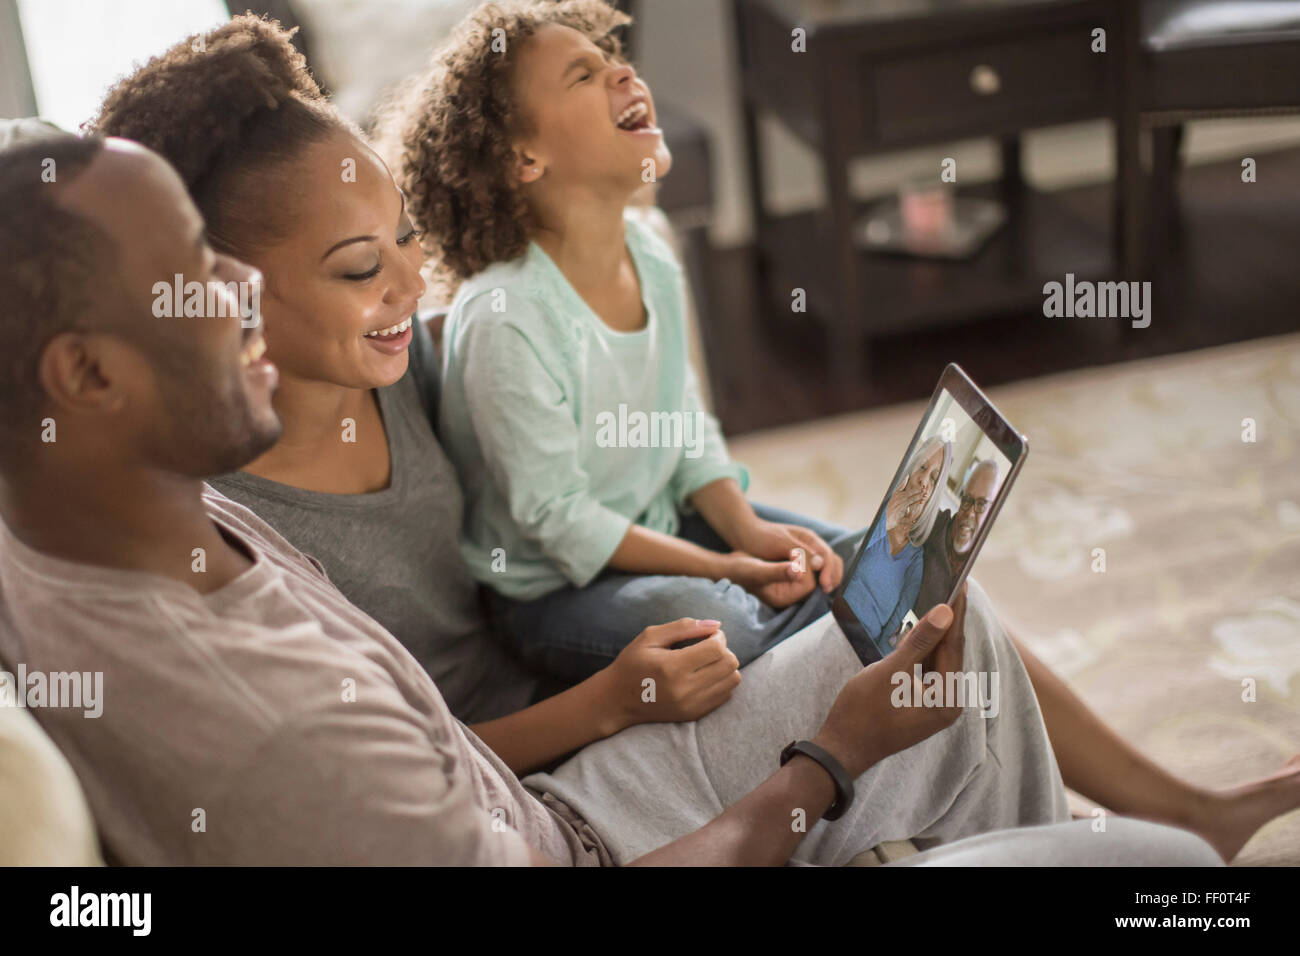 Familie Video-Chats mit digital-Tablette Stockfoto